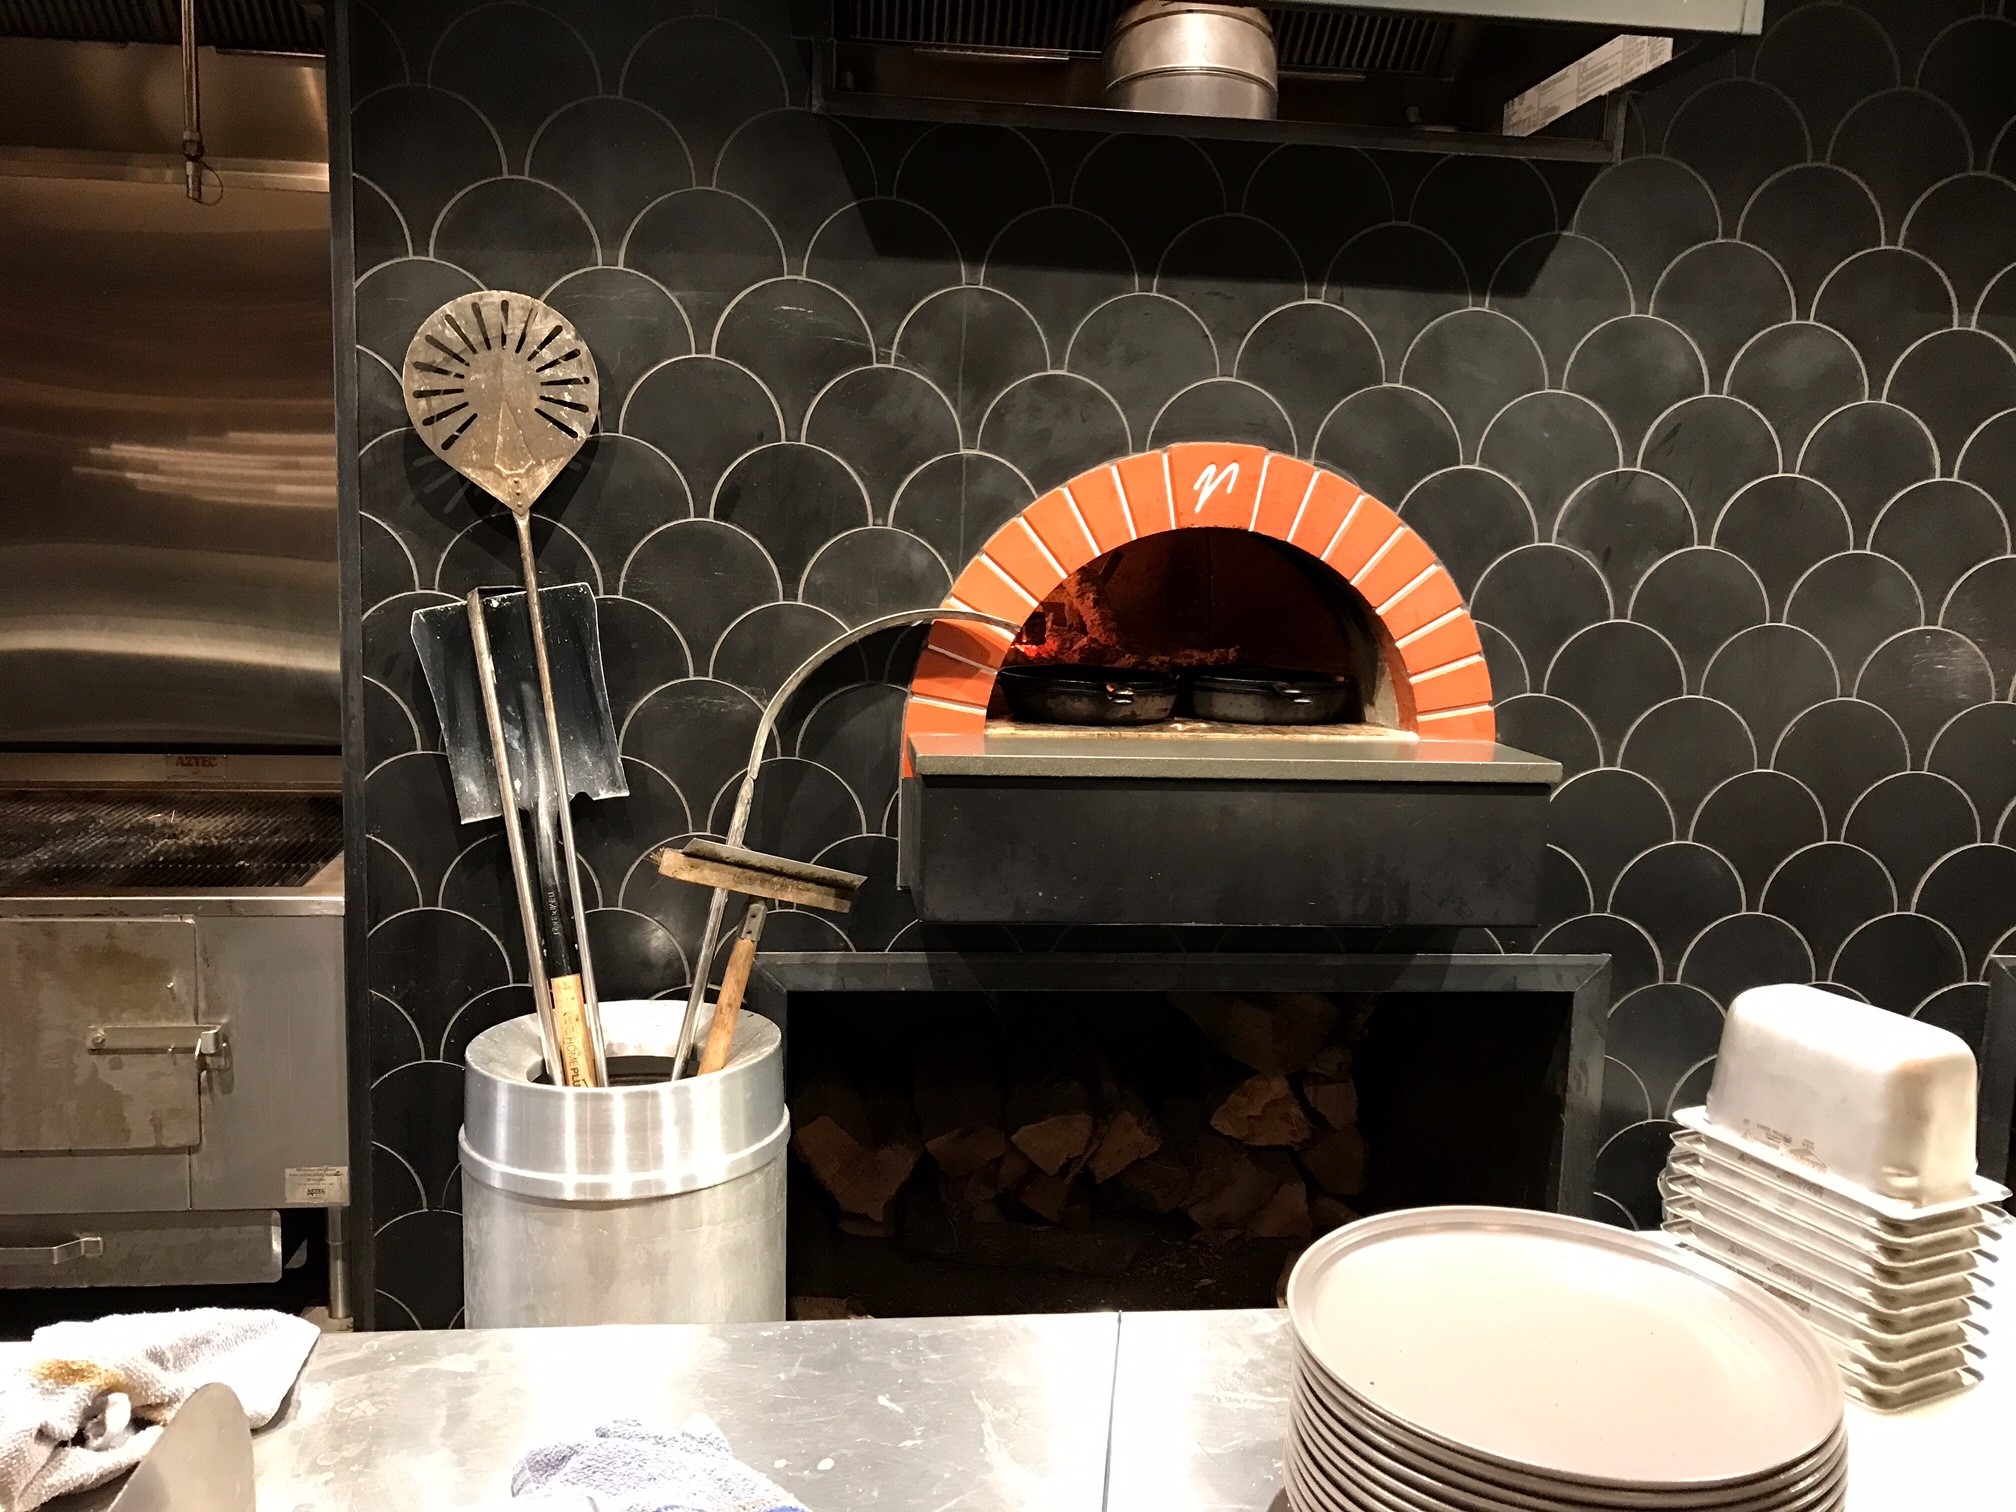 Fleetwood for Wood-Fired Pizza & a Fun Vibe in Calistoga